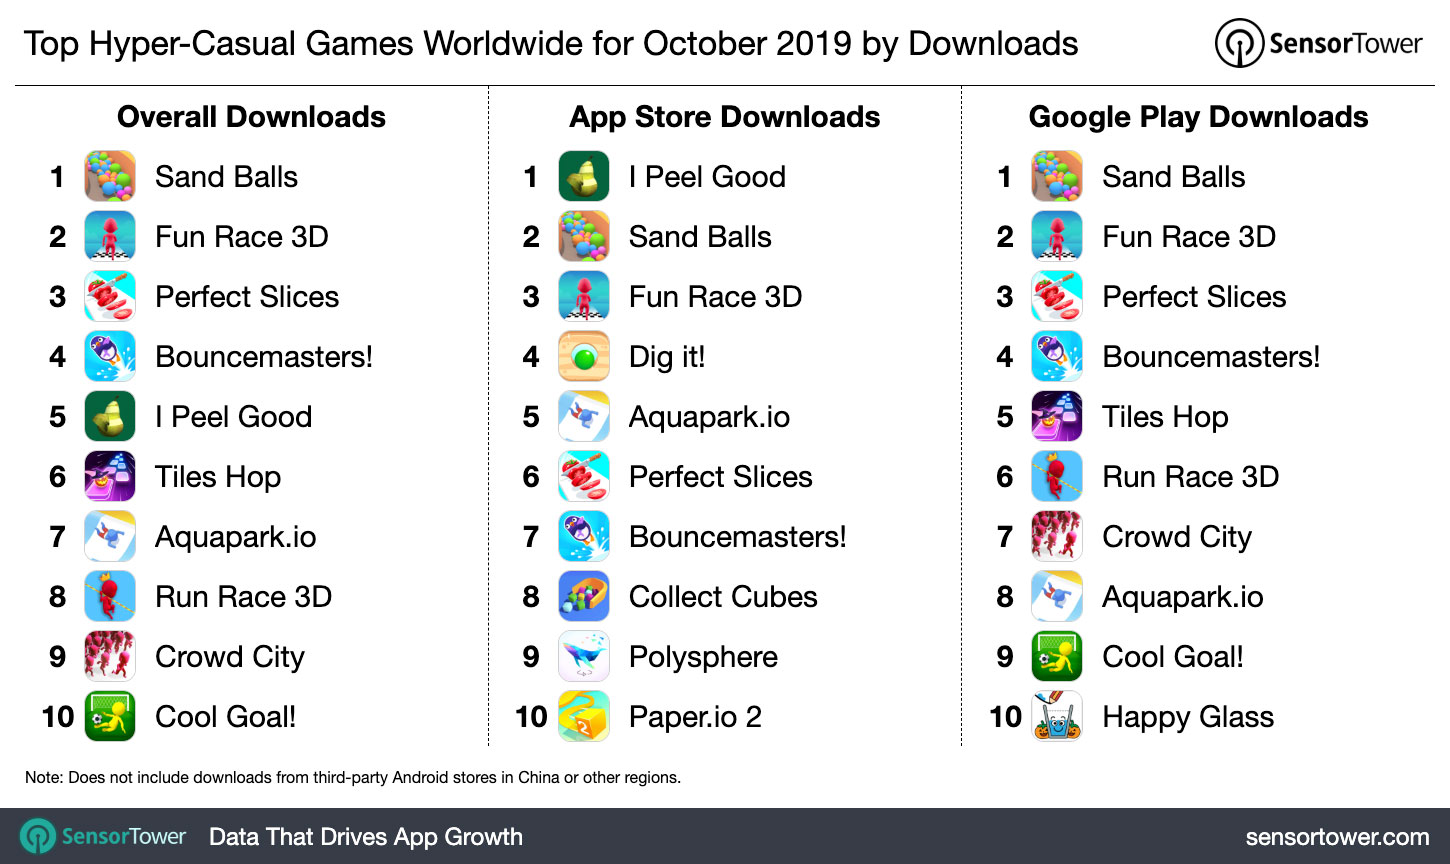 Top Hyper-Casual Games Worldwide for October 2019 by Downloads